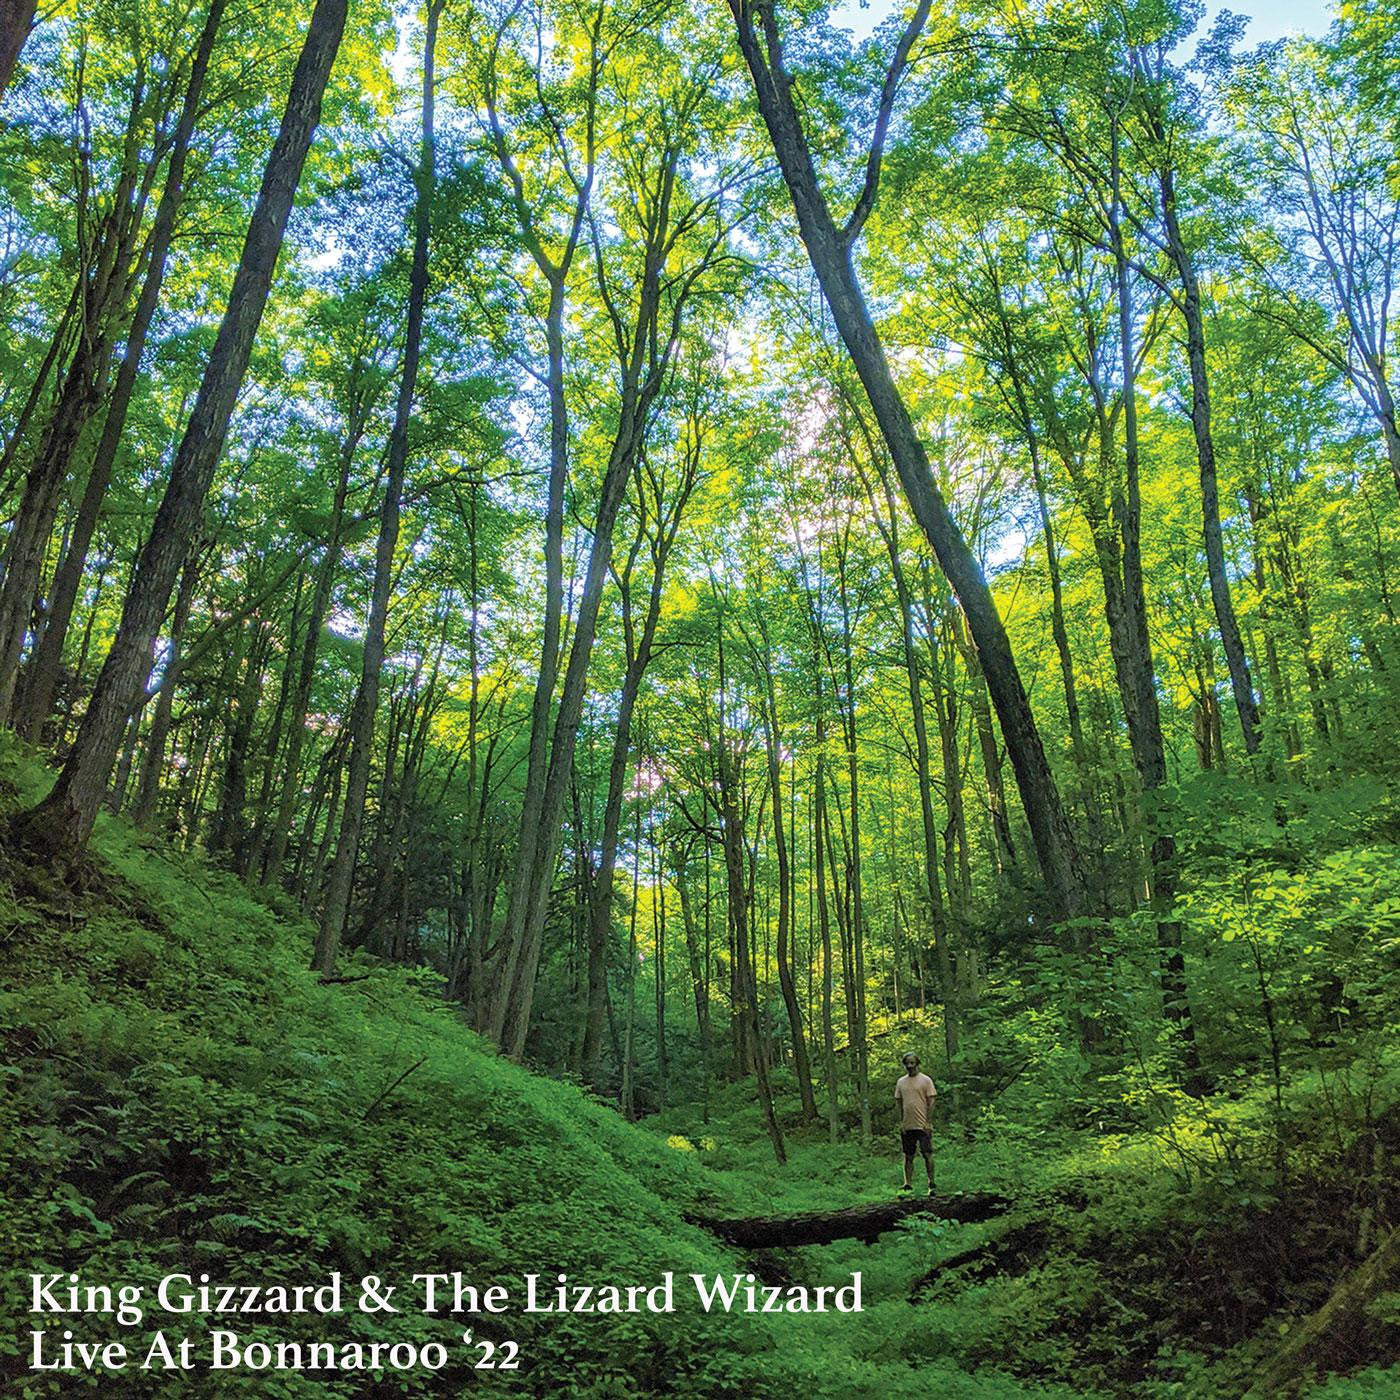 King Gizzard and the Lizard Wizard - Live at Bonnaroo '22 (Vinyl LP)